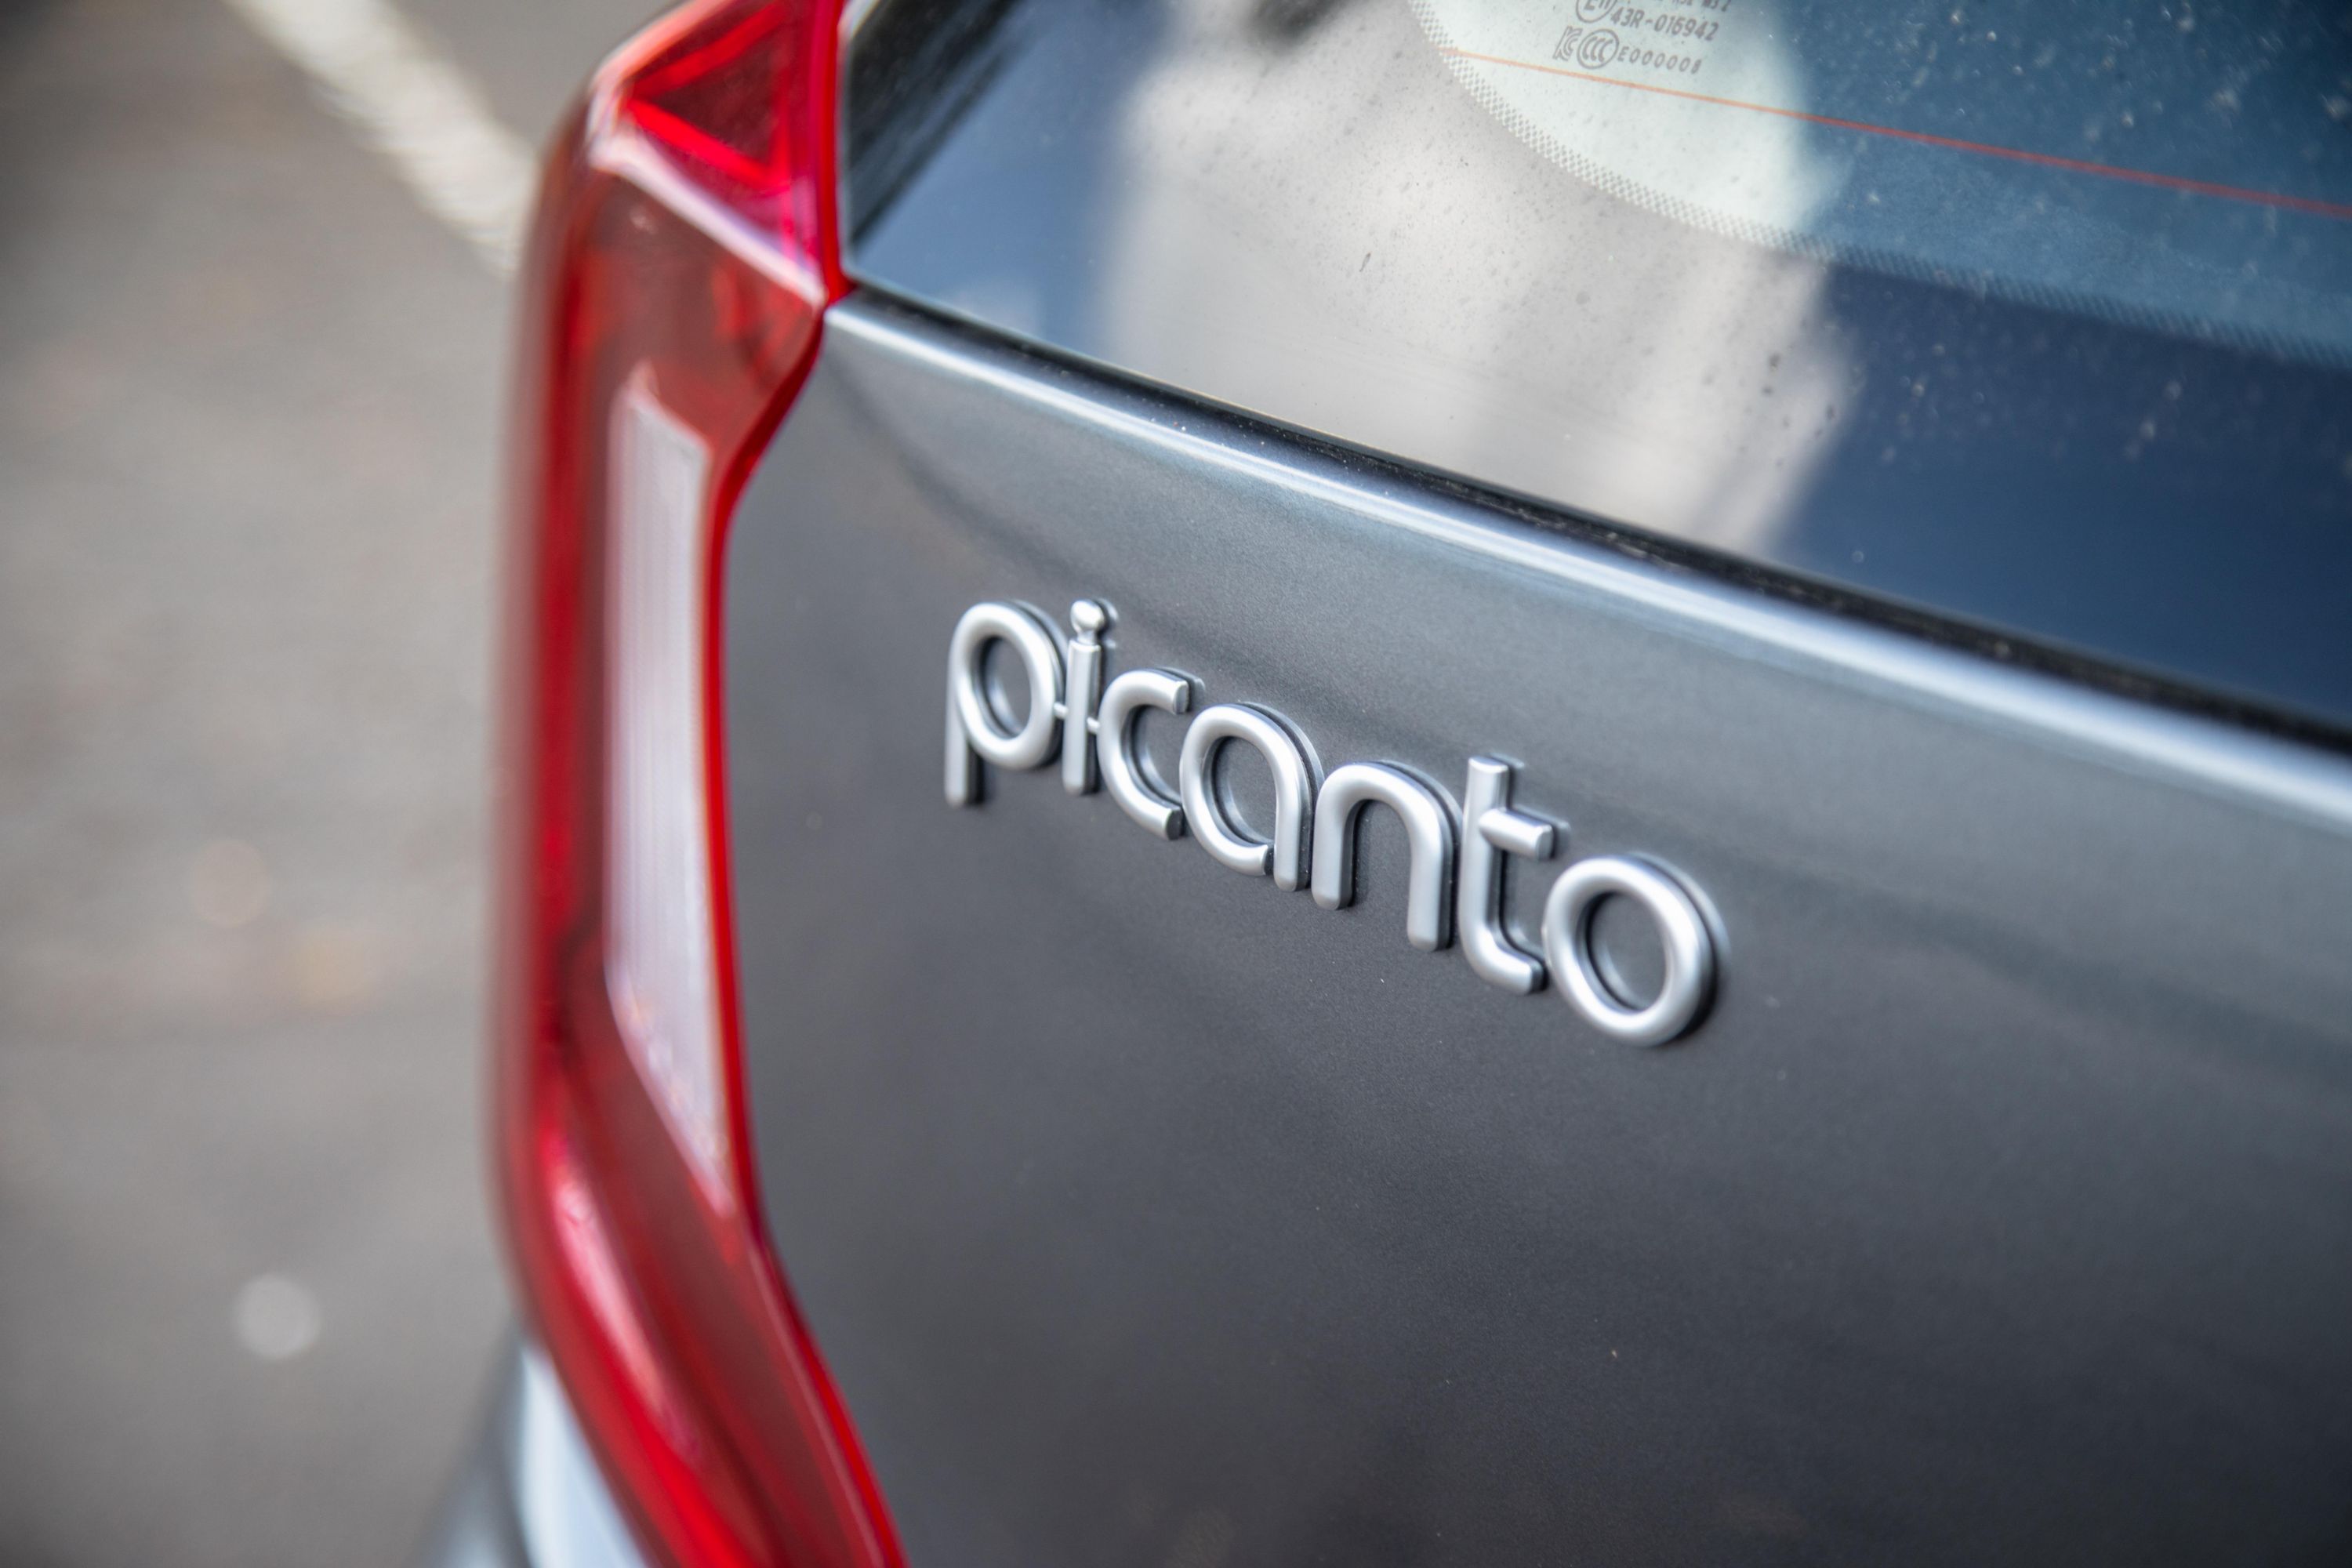 Kia Picanto GT track review (inc. lap time!)